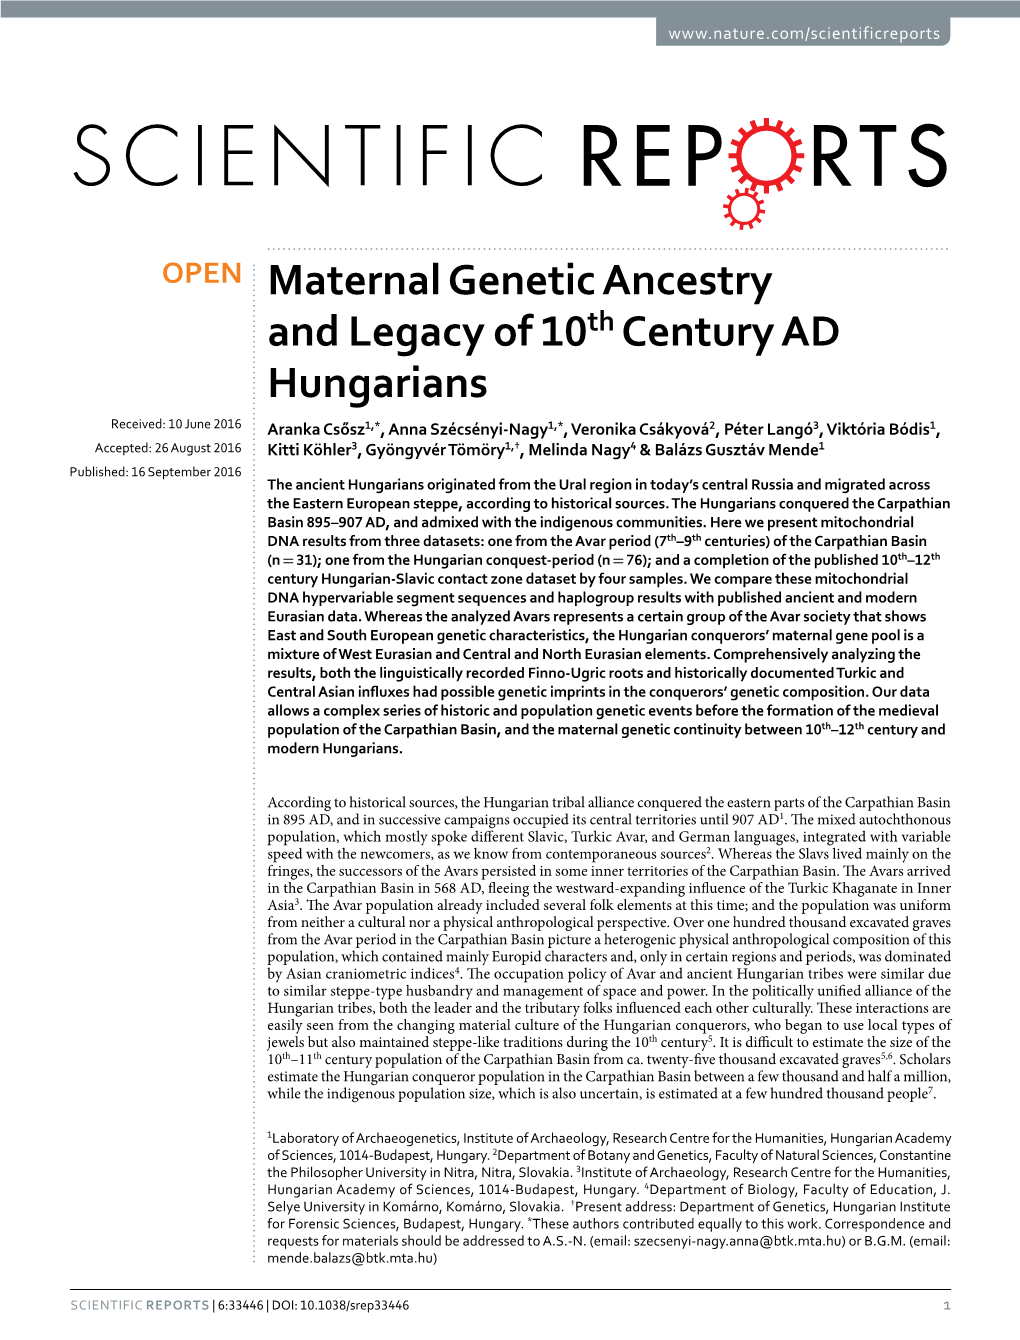 Maternal Genetic Ancestry and Legacy of 10Th Century AD Hungarians